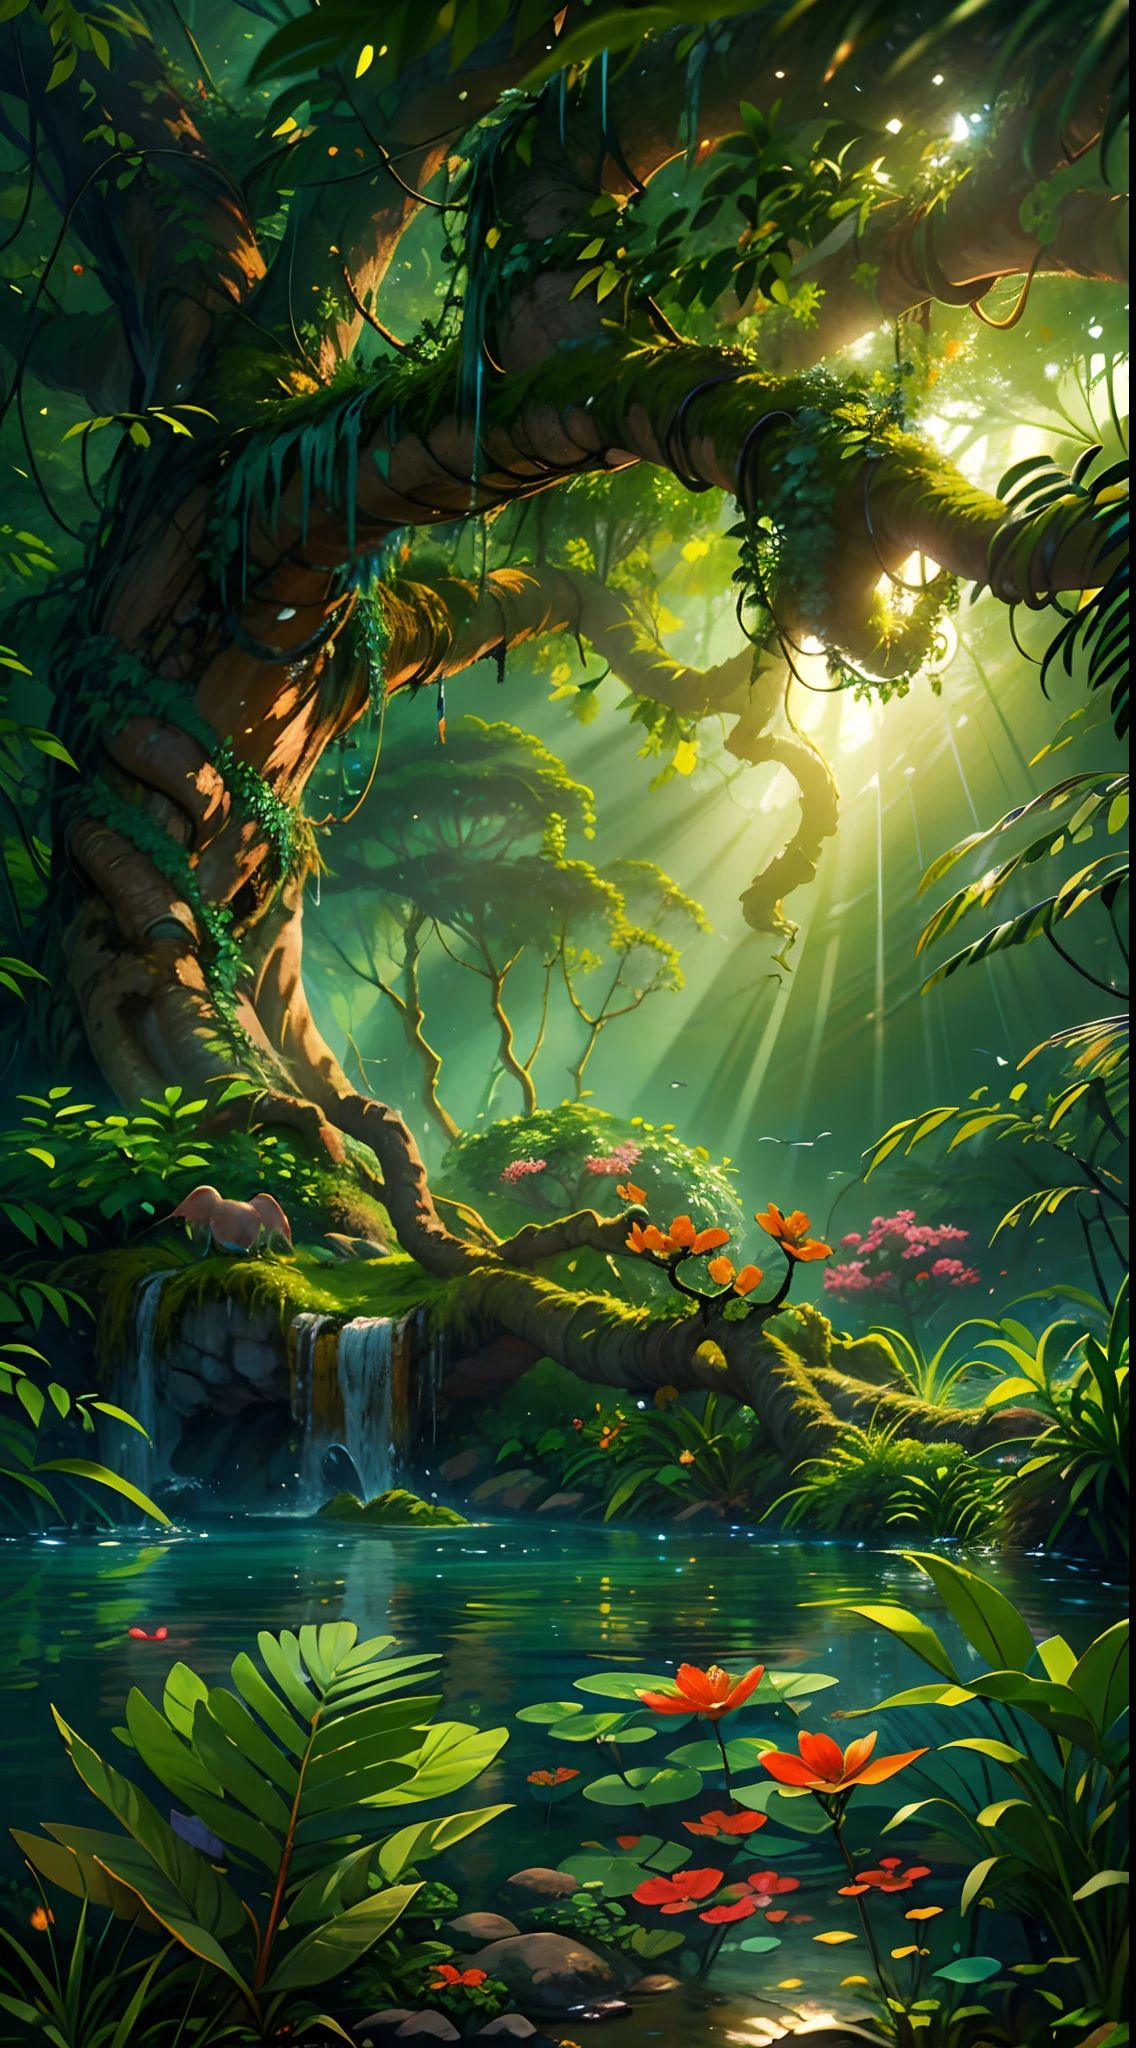 (best quality,4k,8k,highres,masterpiece:1.2),ultra-detailed,(realistic,photorealistic,photo-realistic:1.37),fantasy jungle,giant,ancient tree emerges,tree grows from water,gigantic tropical leaves,partly submerged in water,mysterious,enchanted atmosphere,shimmering sunlight,translucent water,colorful red and blue tree with vibrant,exotic foliage,lush,tropical vegetation,brilliantly colored flowers,butterflies fluttering around,colorful parrots perched on branches,lush,vibrant green moss covering tree trunks,majestic,swaying vines hanging from tree branches,ethereal,mist-filled air,small floating jellyfish illuminated by underwater light,subtle reflection on the water surface,gentle ripples created by floating leaves,peaceful and serene,hidden creatures peeking through the foliage,dappled light filtering through the tree canopy,magical,dreamlike scenery,evokes a sense of wonder and awe,colorful,otherworldly flora and fauna,breathtaking and surreal,an escape into a mystical realm,invites viewers to explore and get lost in its beauty